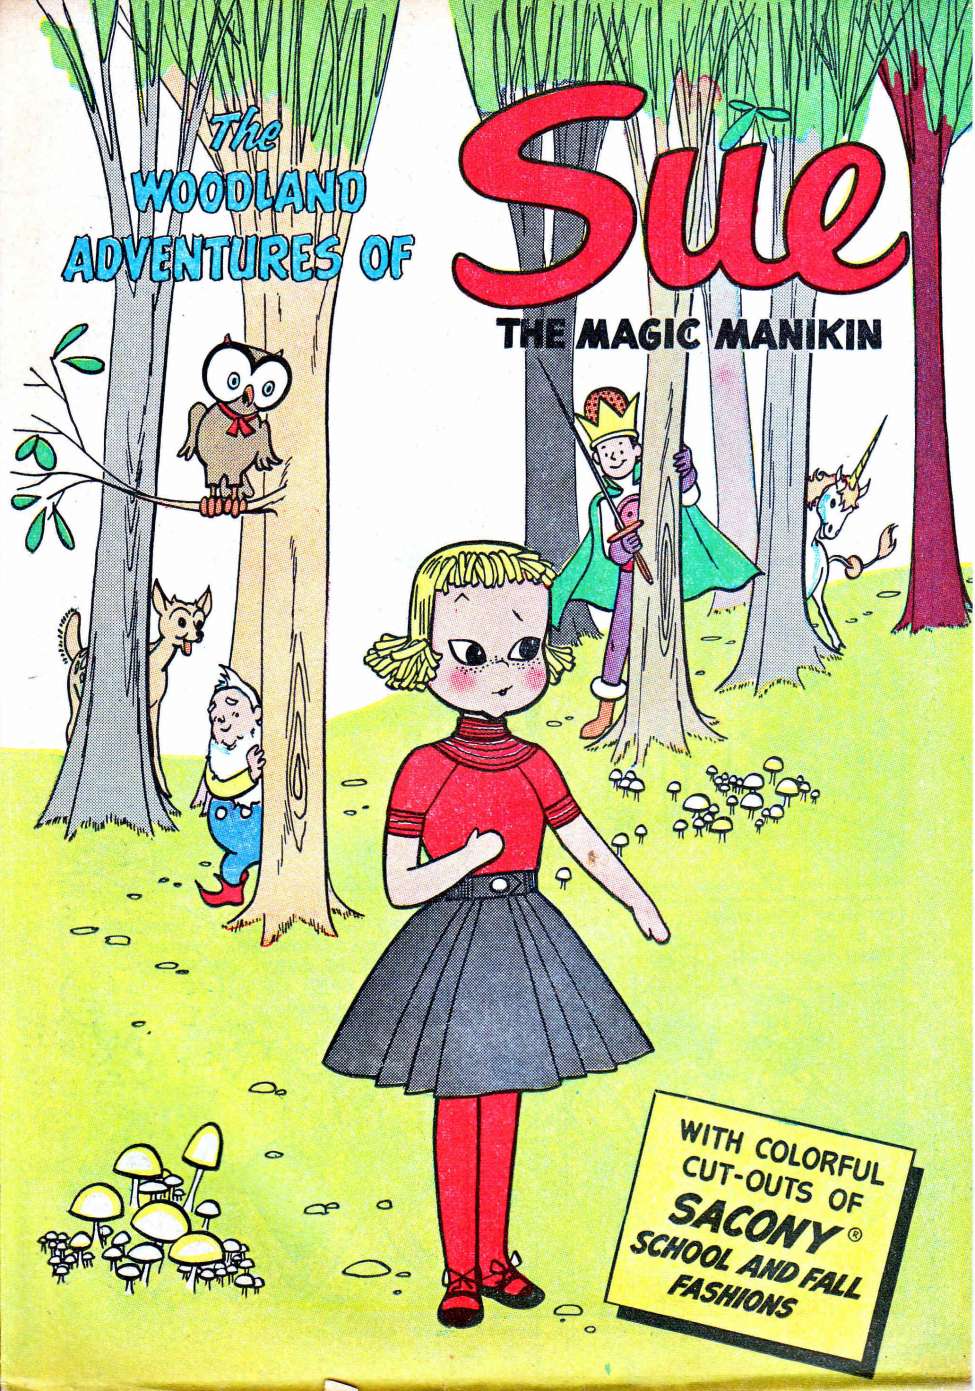 Comic Book Cover For The Woodland Adventures Of Sue The Magic Manikin